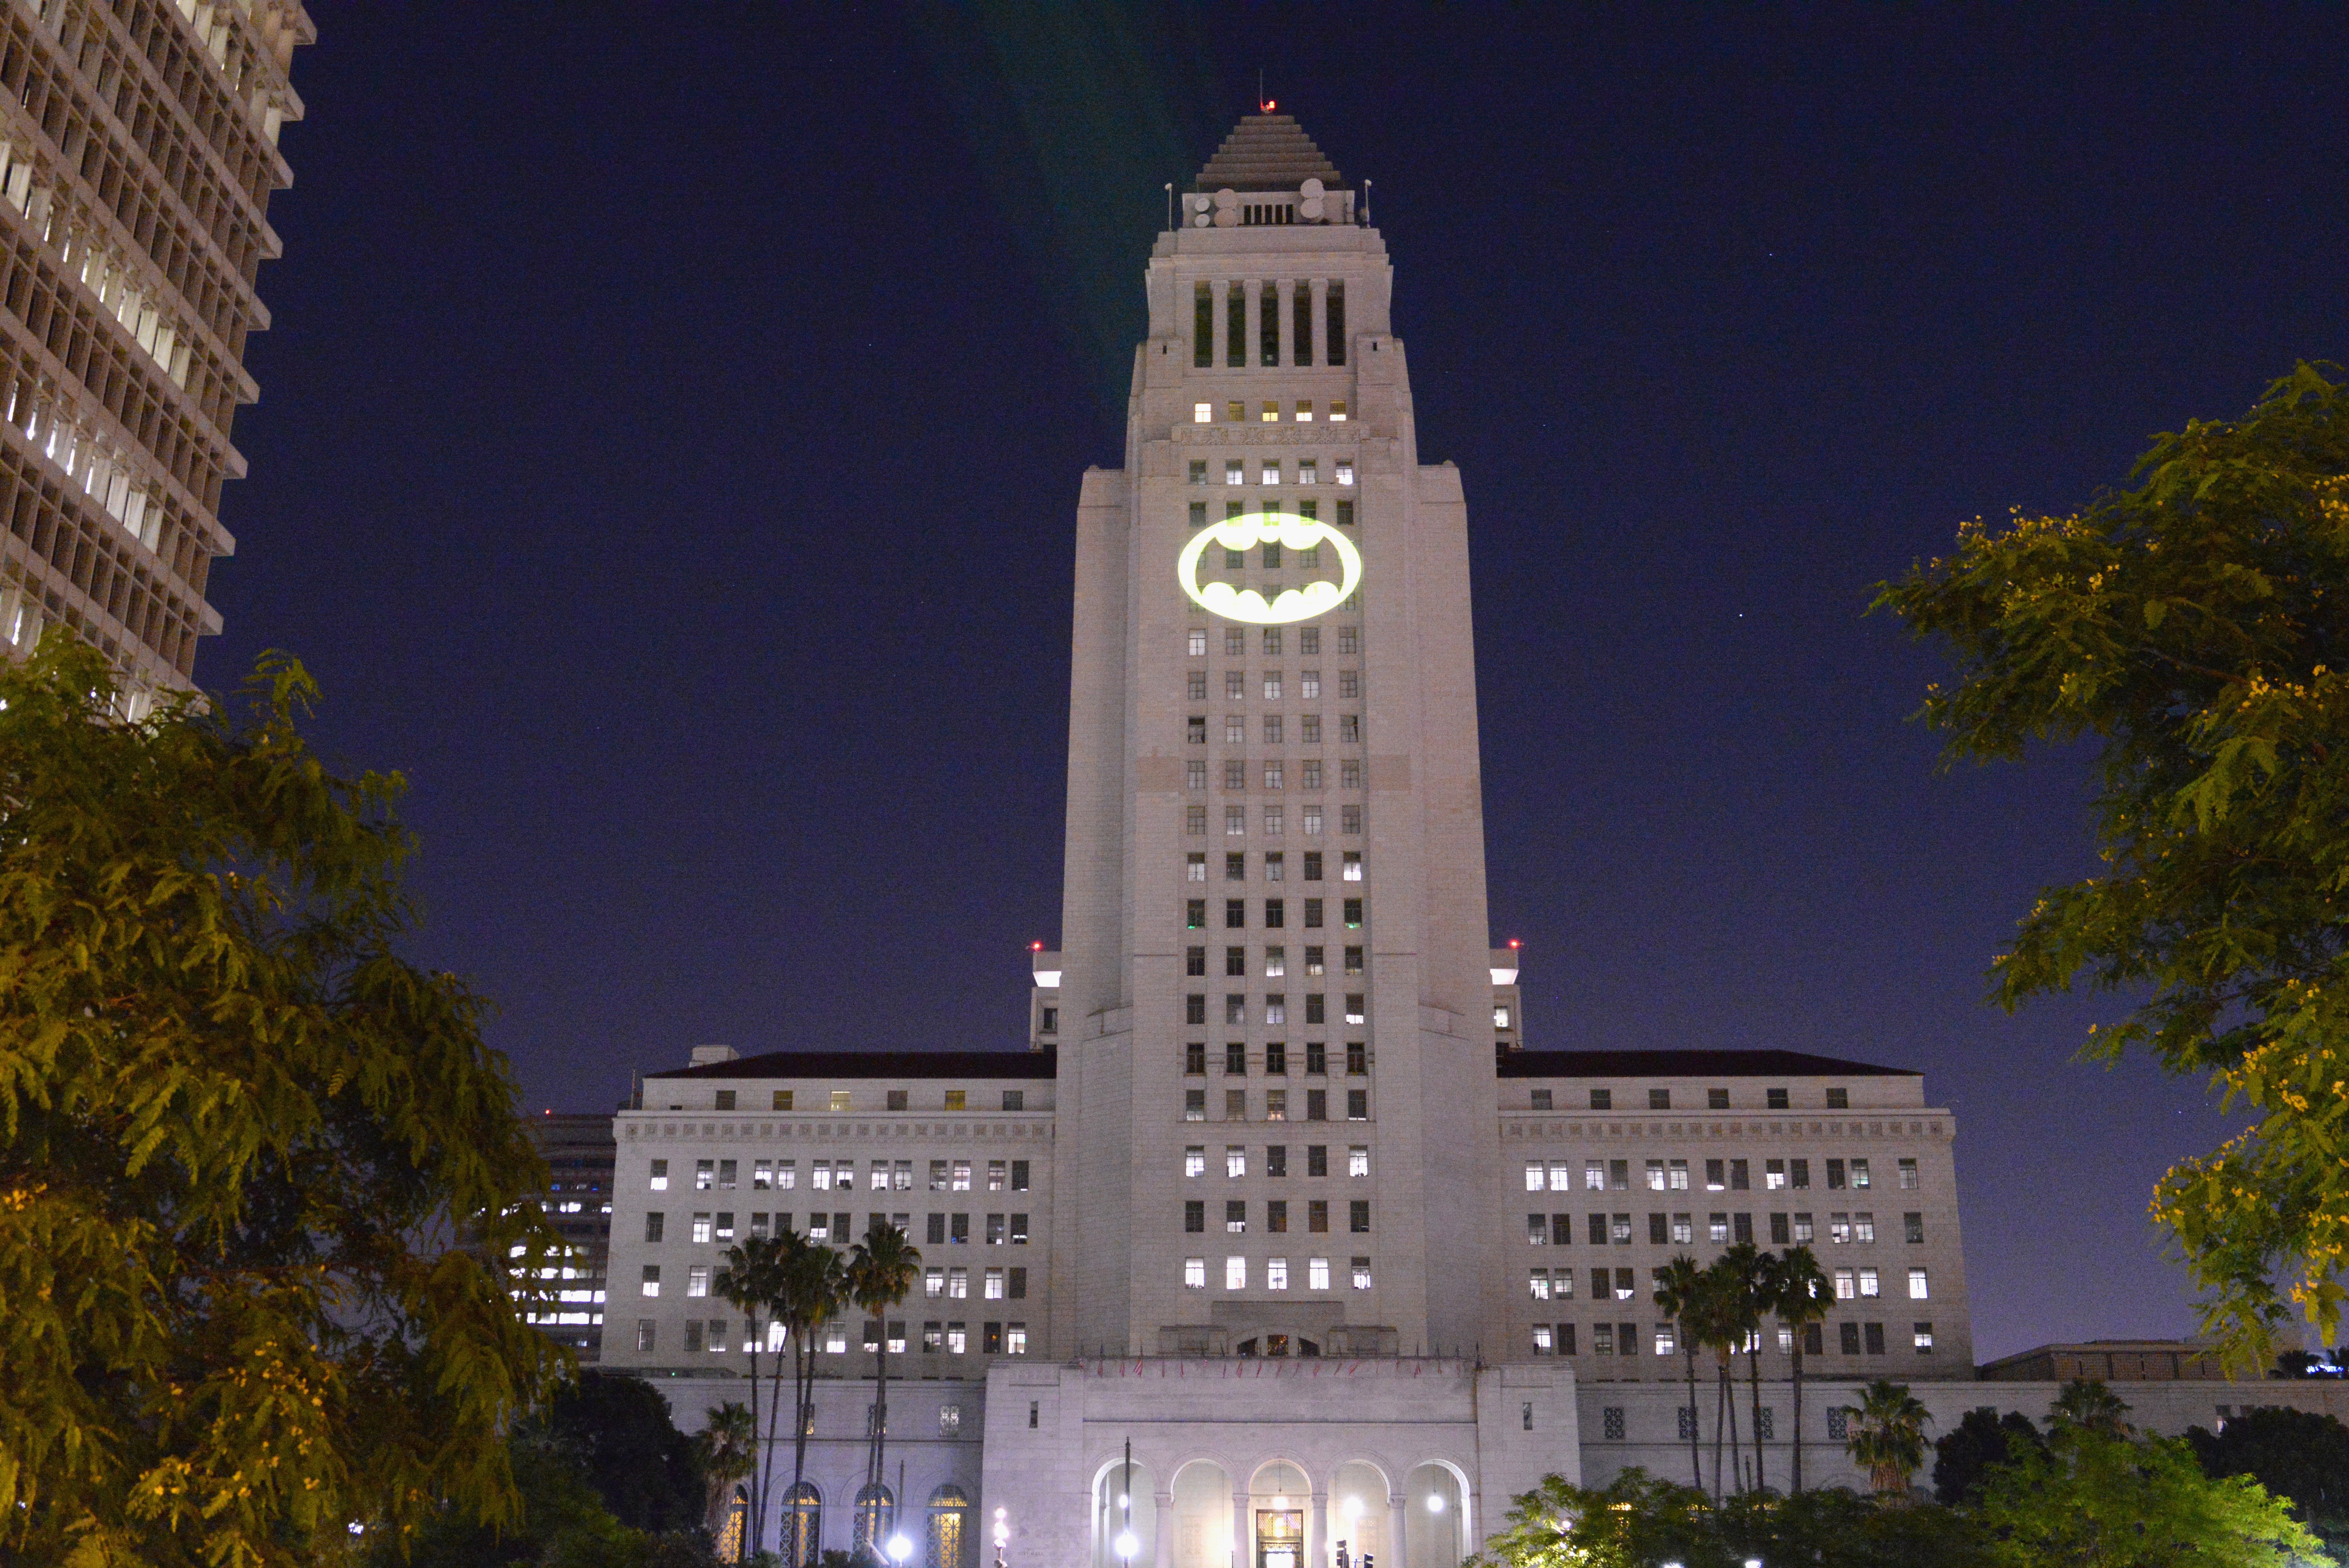 Bat-Signal posted on City Hall at the Los Angeles Tribute To Adam West held on June 15, 2017 